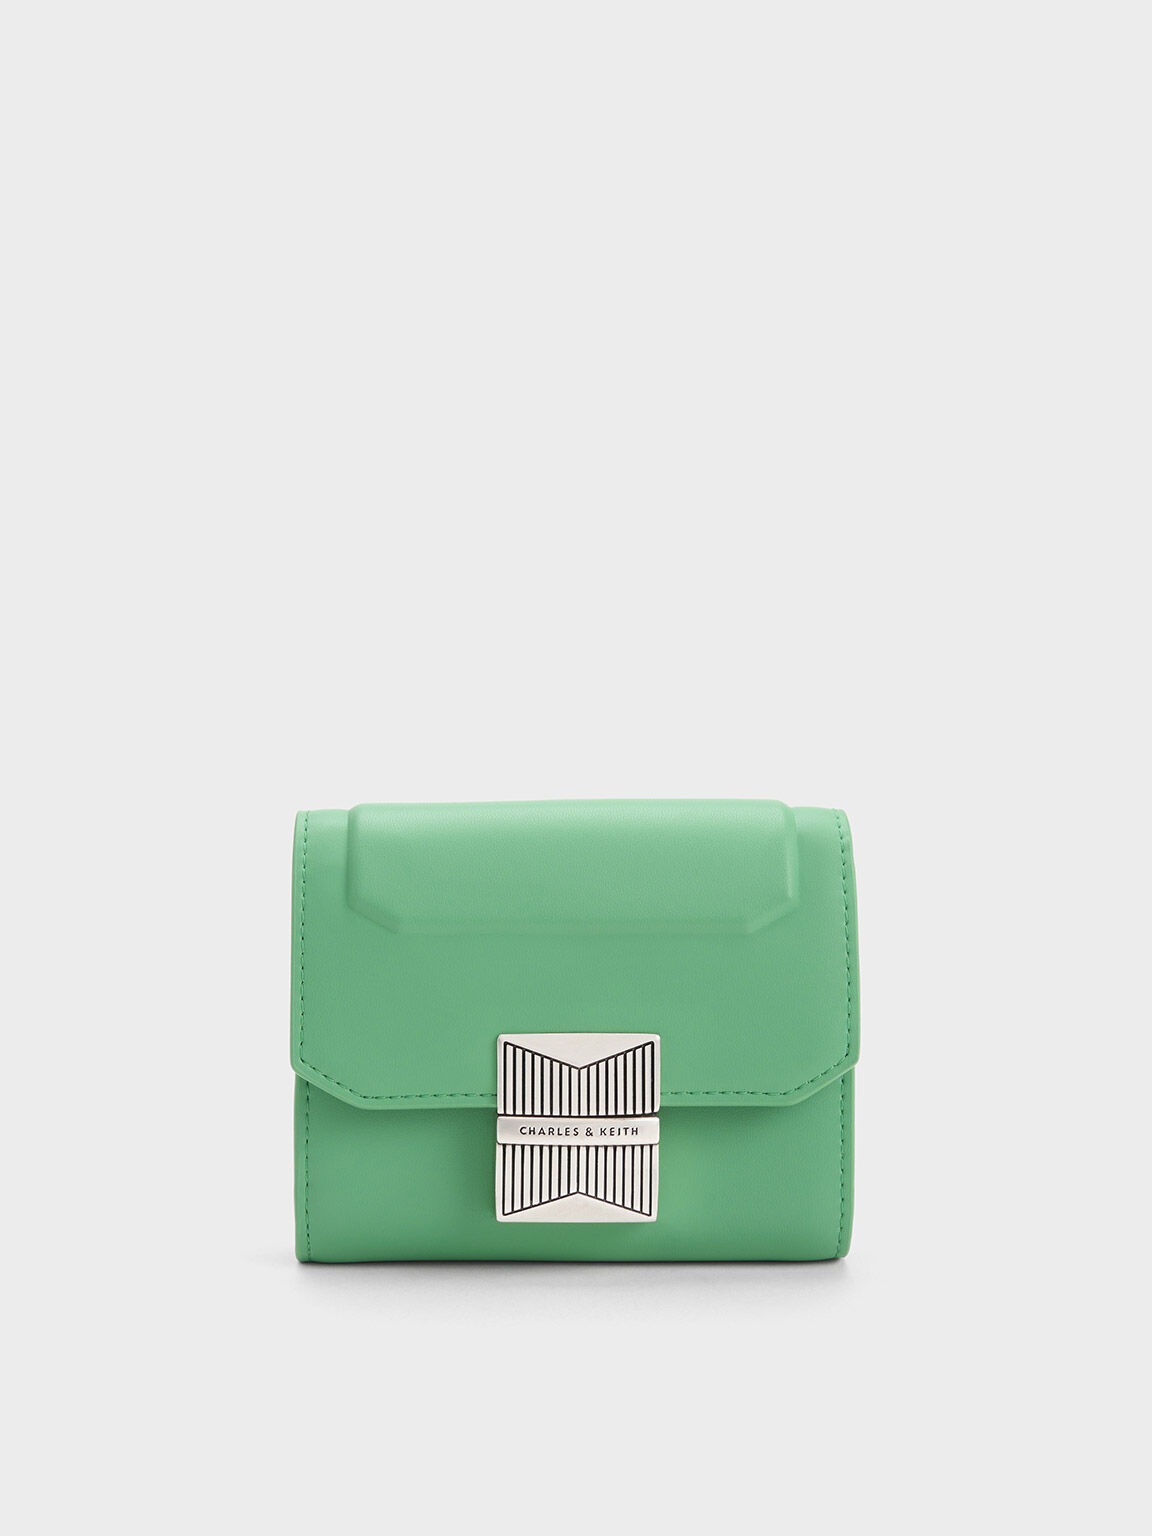 Charles & Keith Metallic Accent Chain Handle Bag in Green